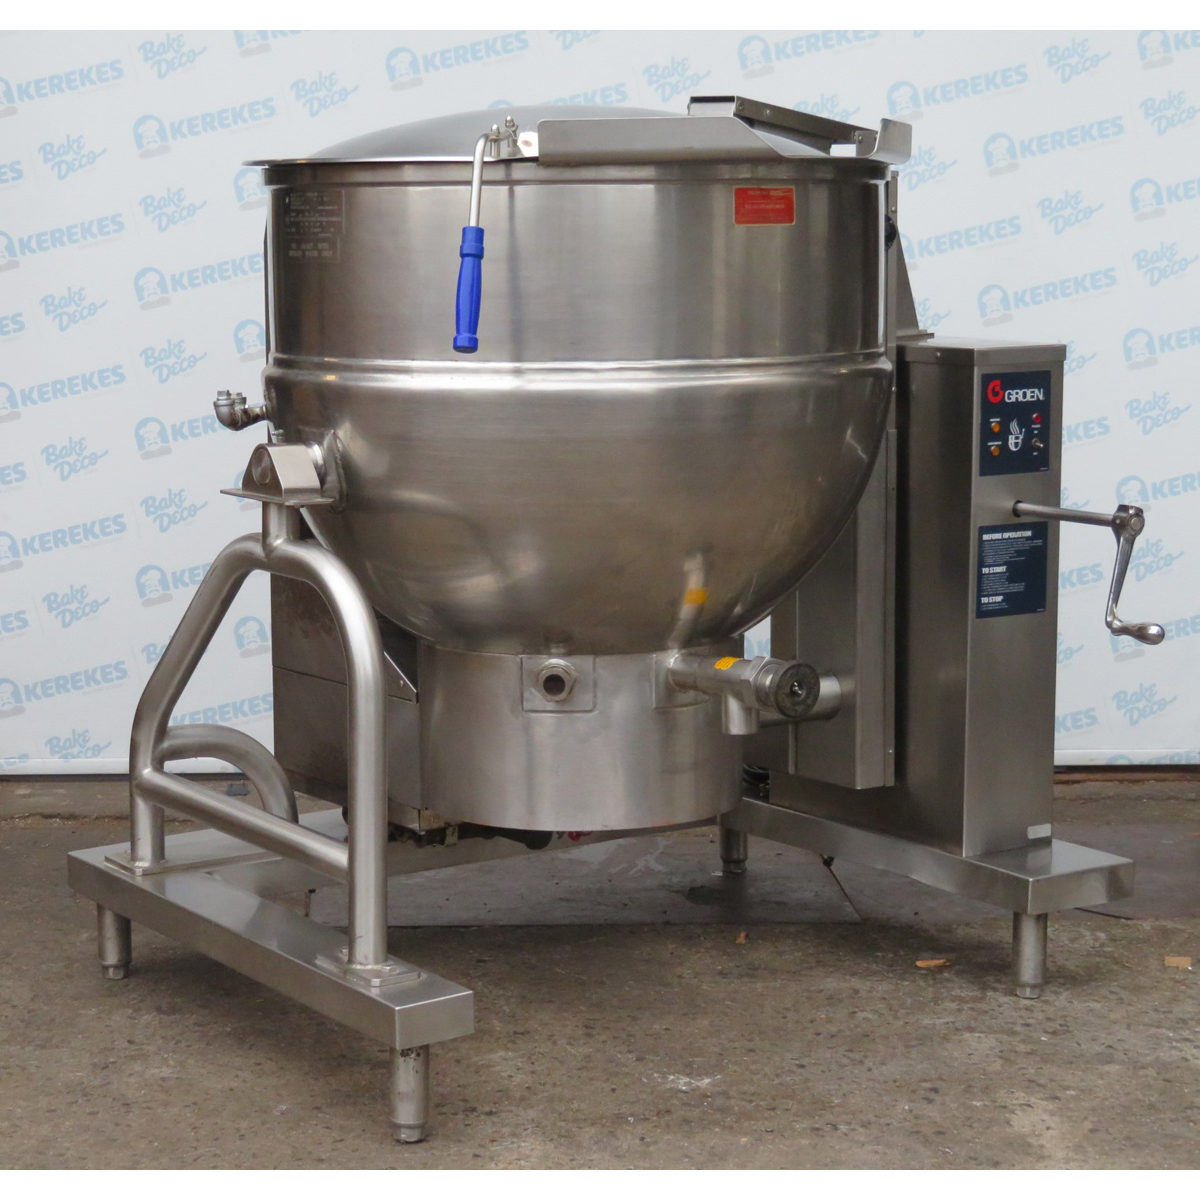 Groen DHT-80 80 Gallon Tilt Kettle, Used Great Condition